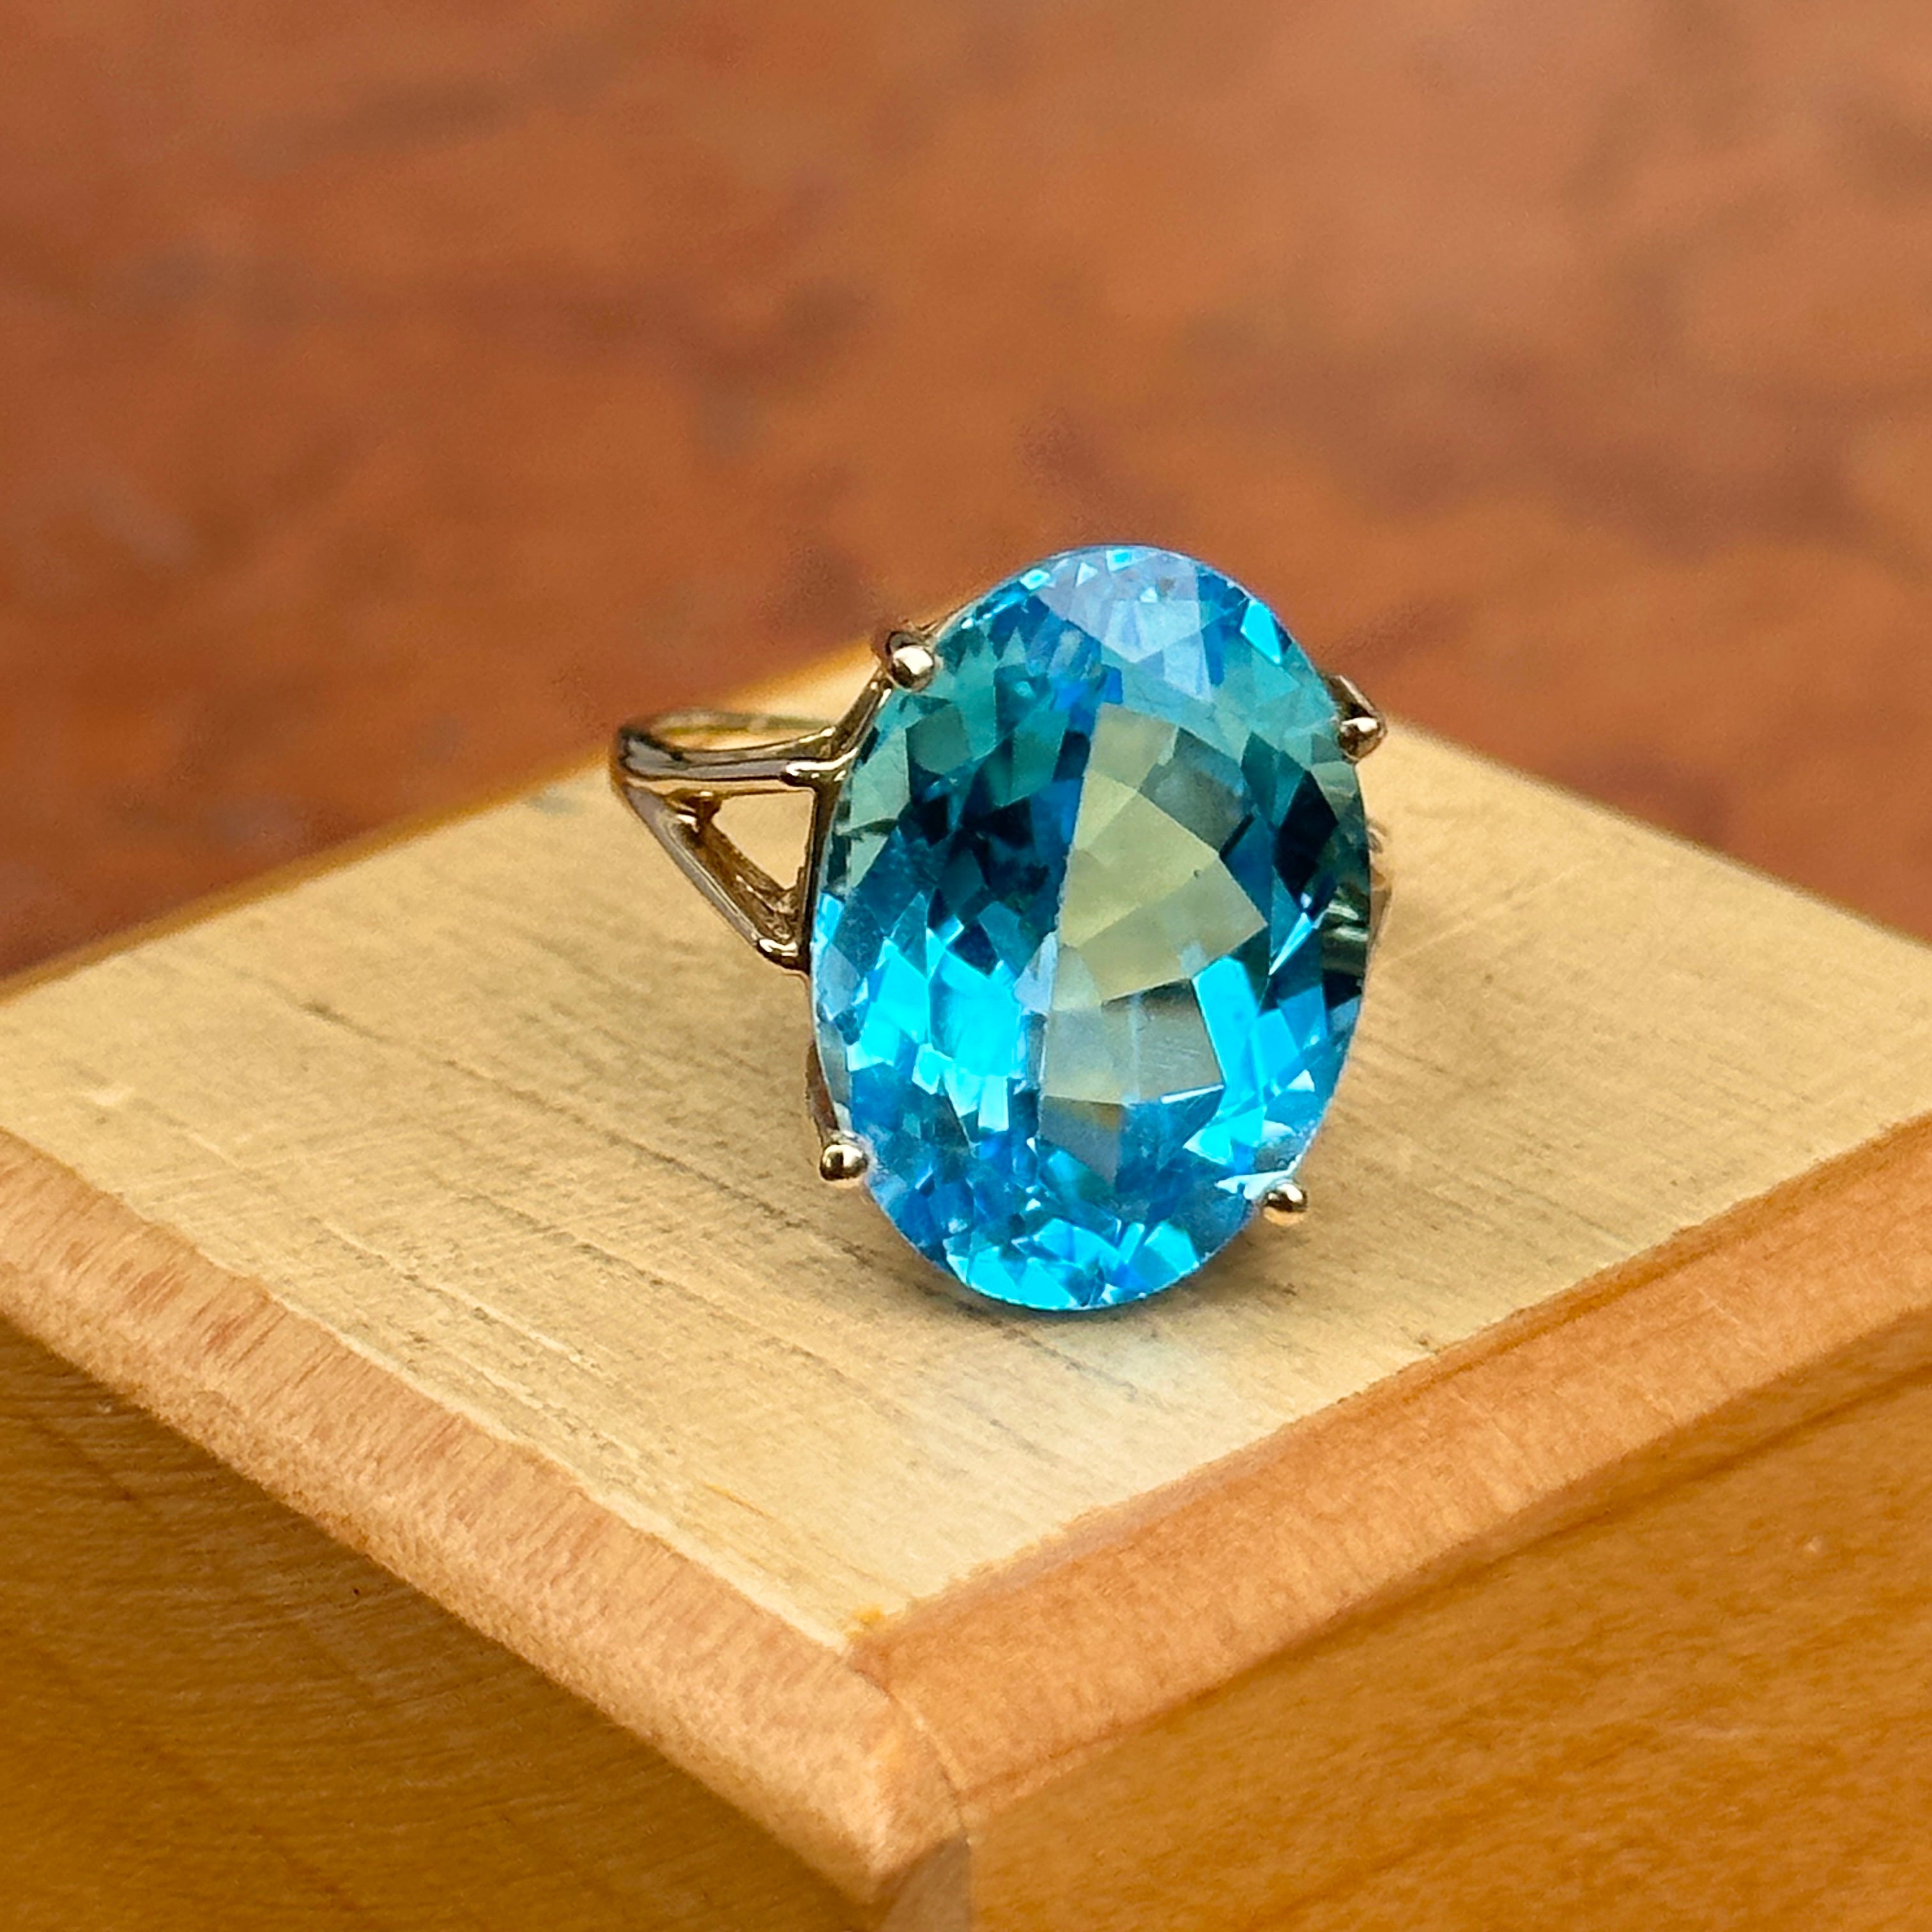 Ocean-Themed Sterling Silver Ring with Faceted Blue Topaz - Marine Gem |  NOVICA